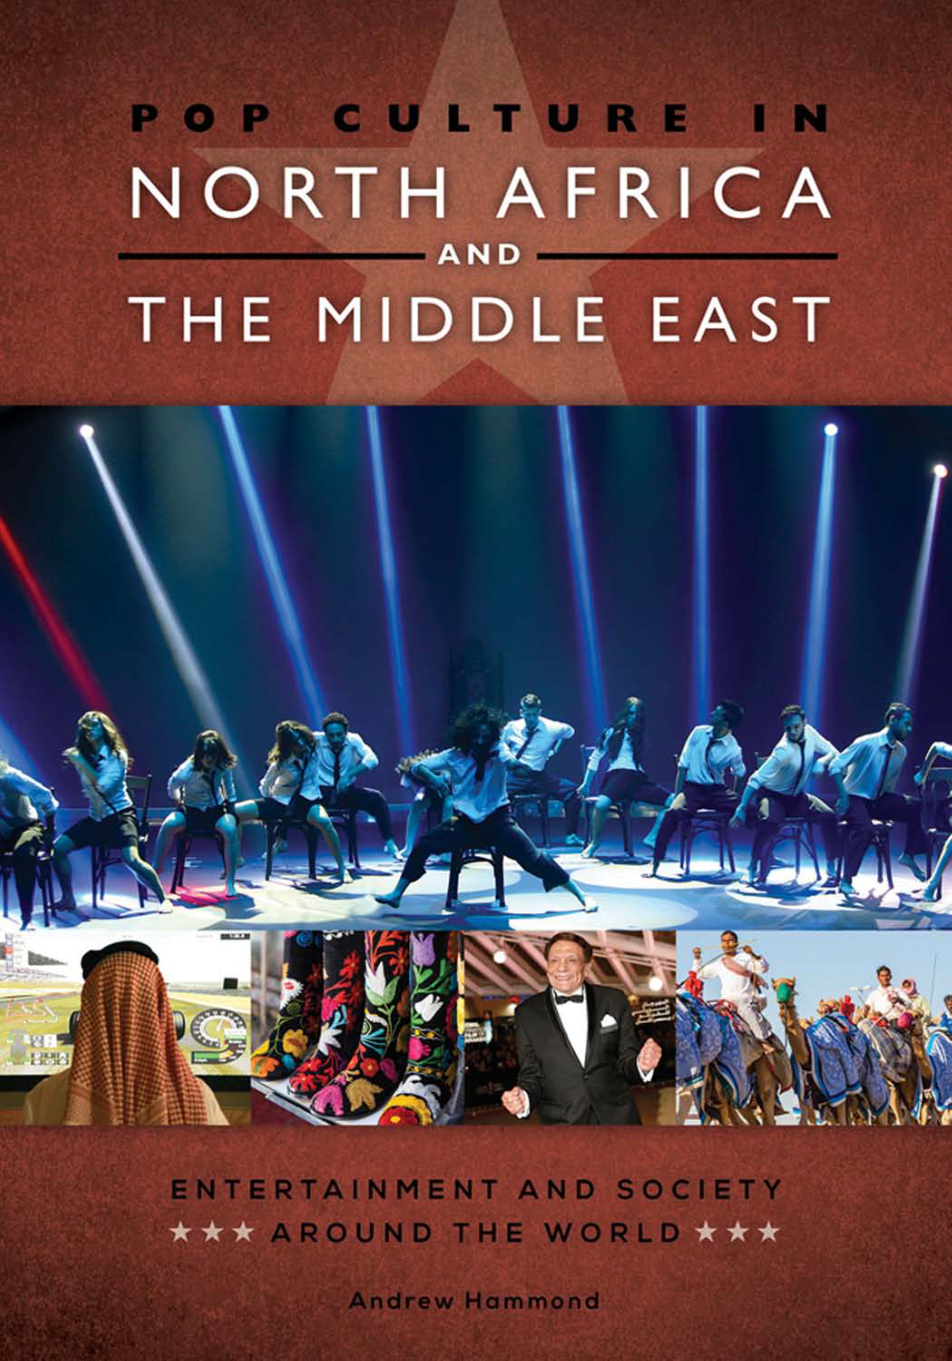 Pop Culture in North Africa and the Middle East: Entertainment and Society around the World page Cover1